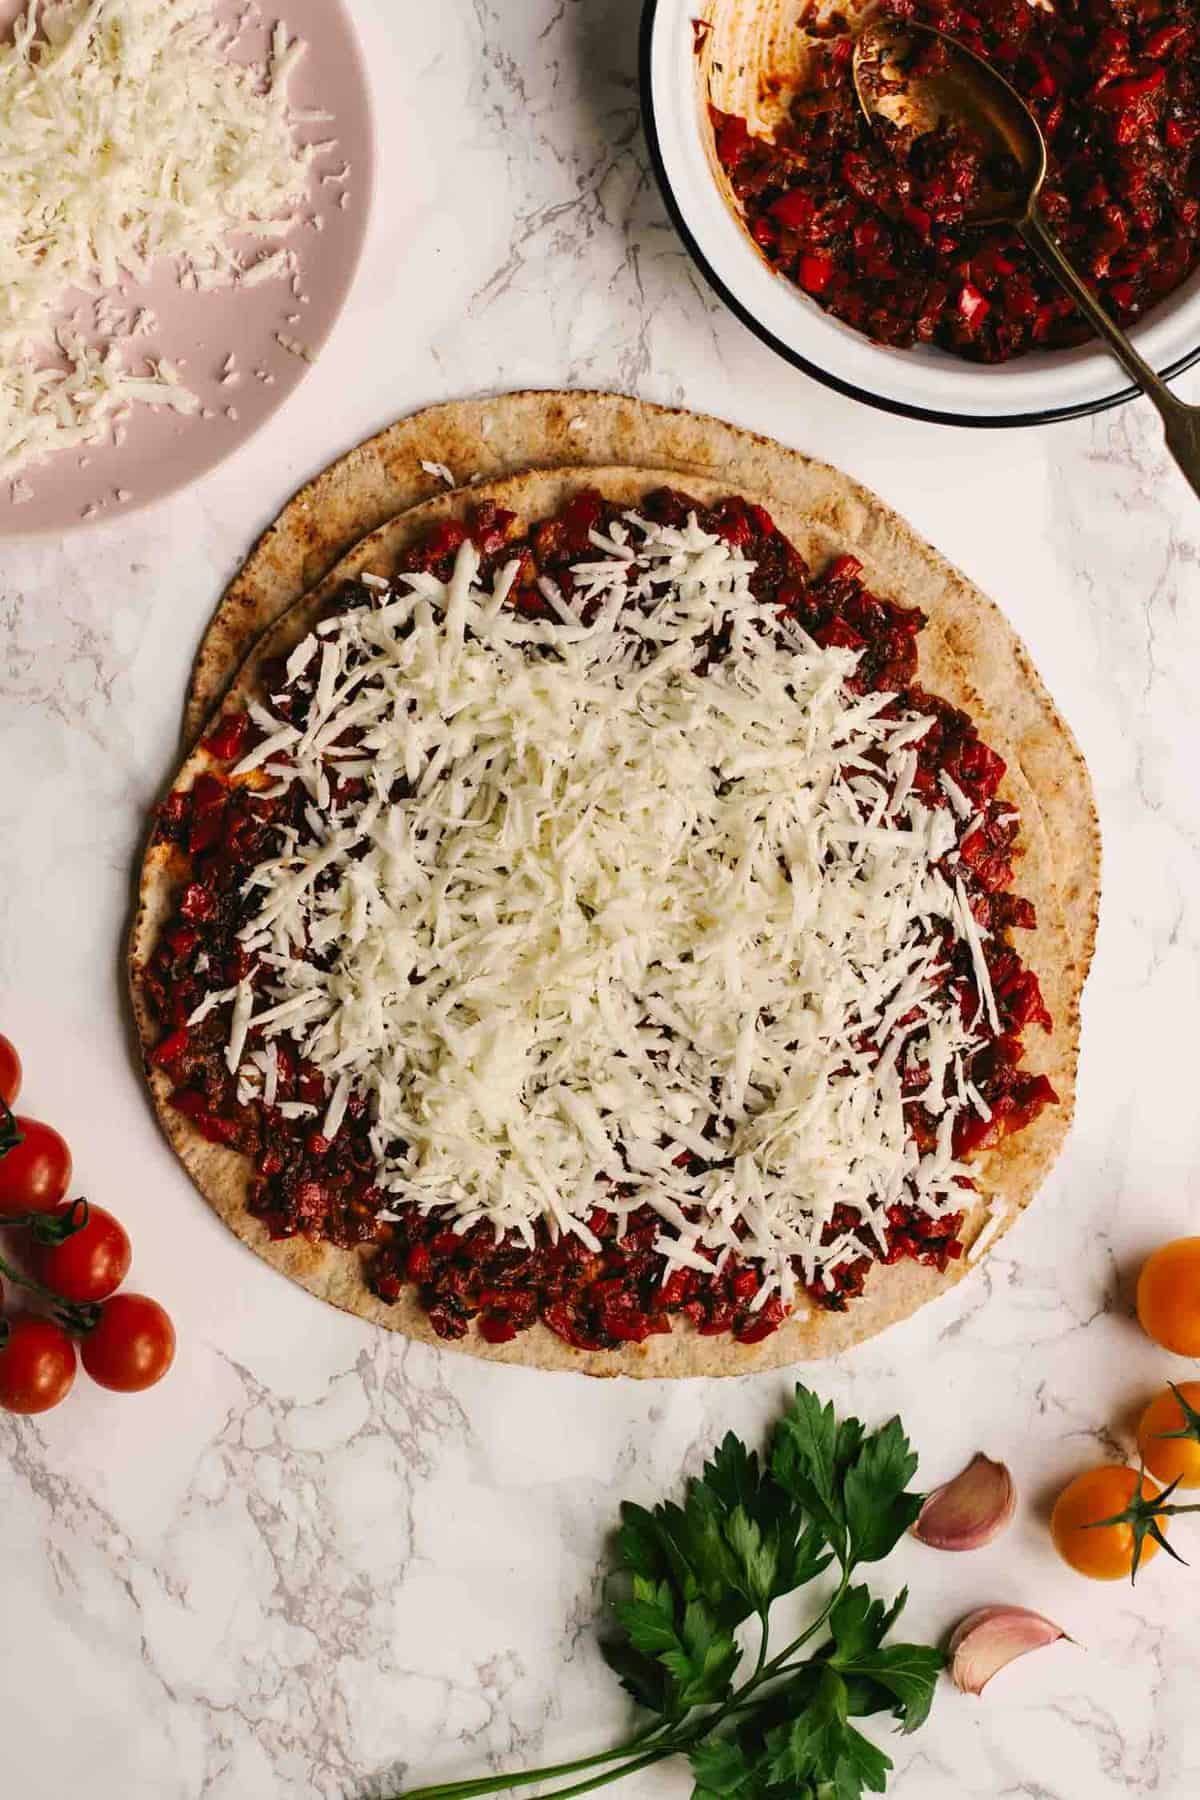 Harissa Halloumi Flatbreads with Red Peppers Recipe | Appetizers | Lunch | Dinner | Vegetarian